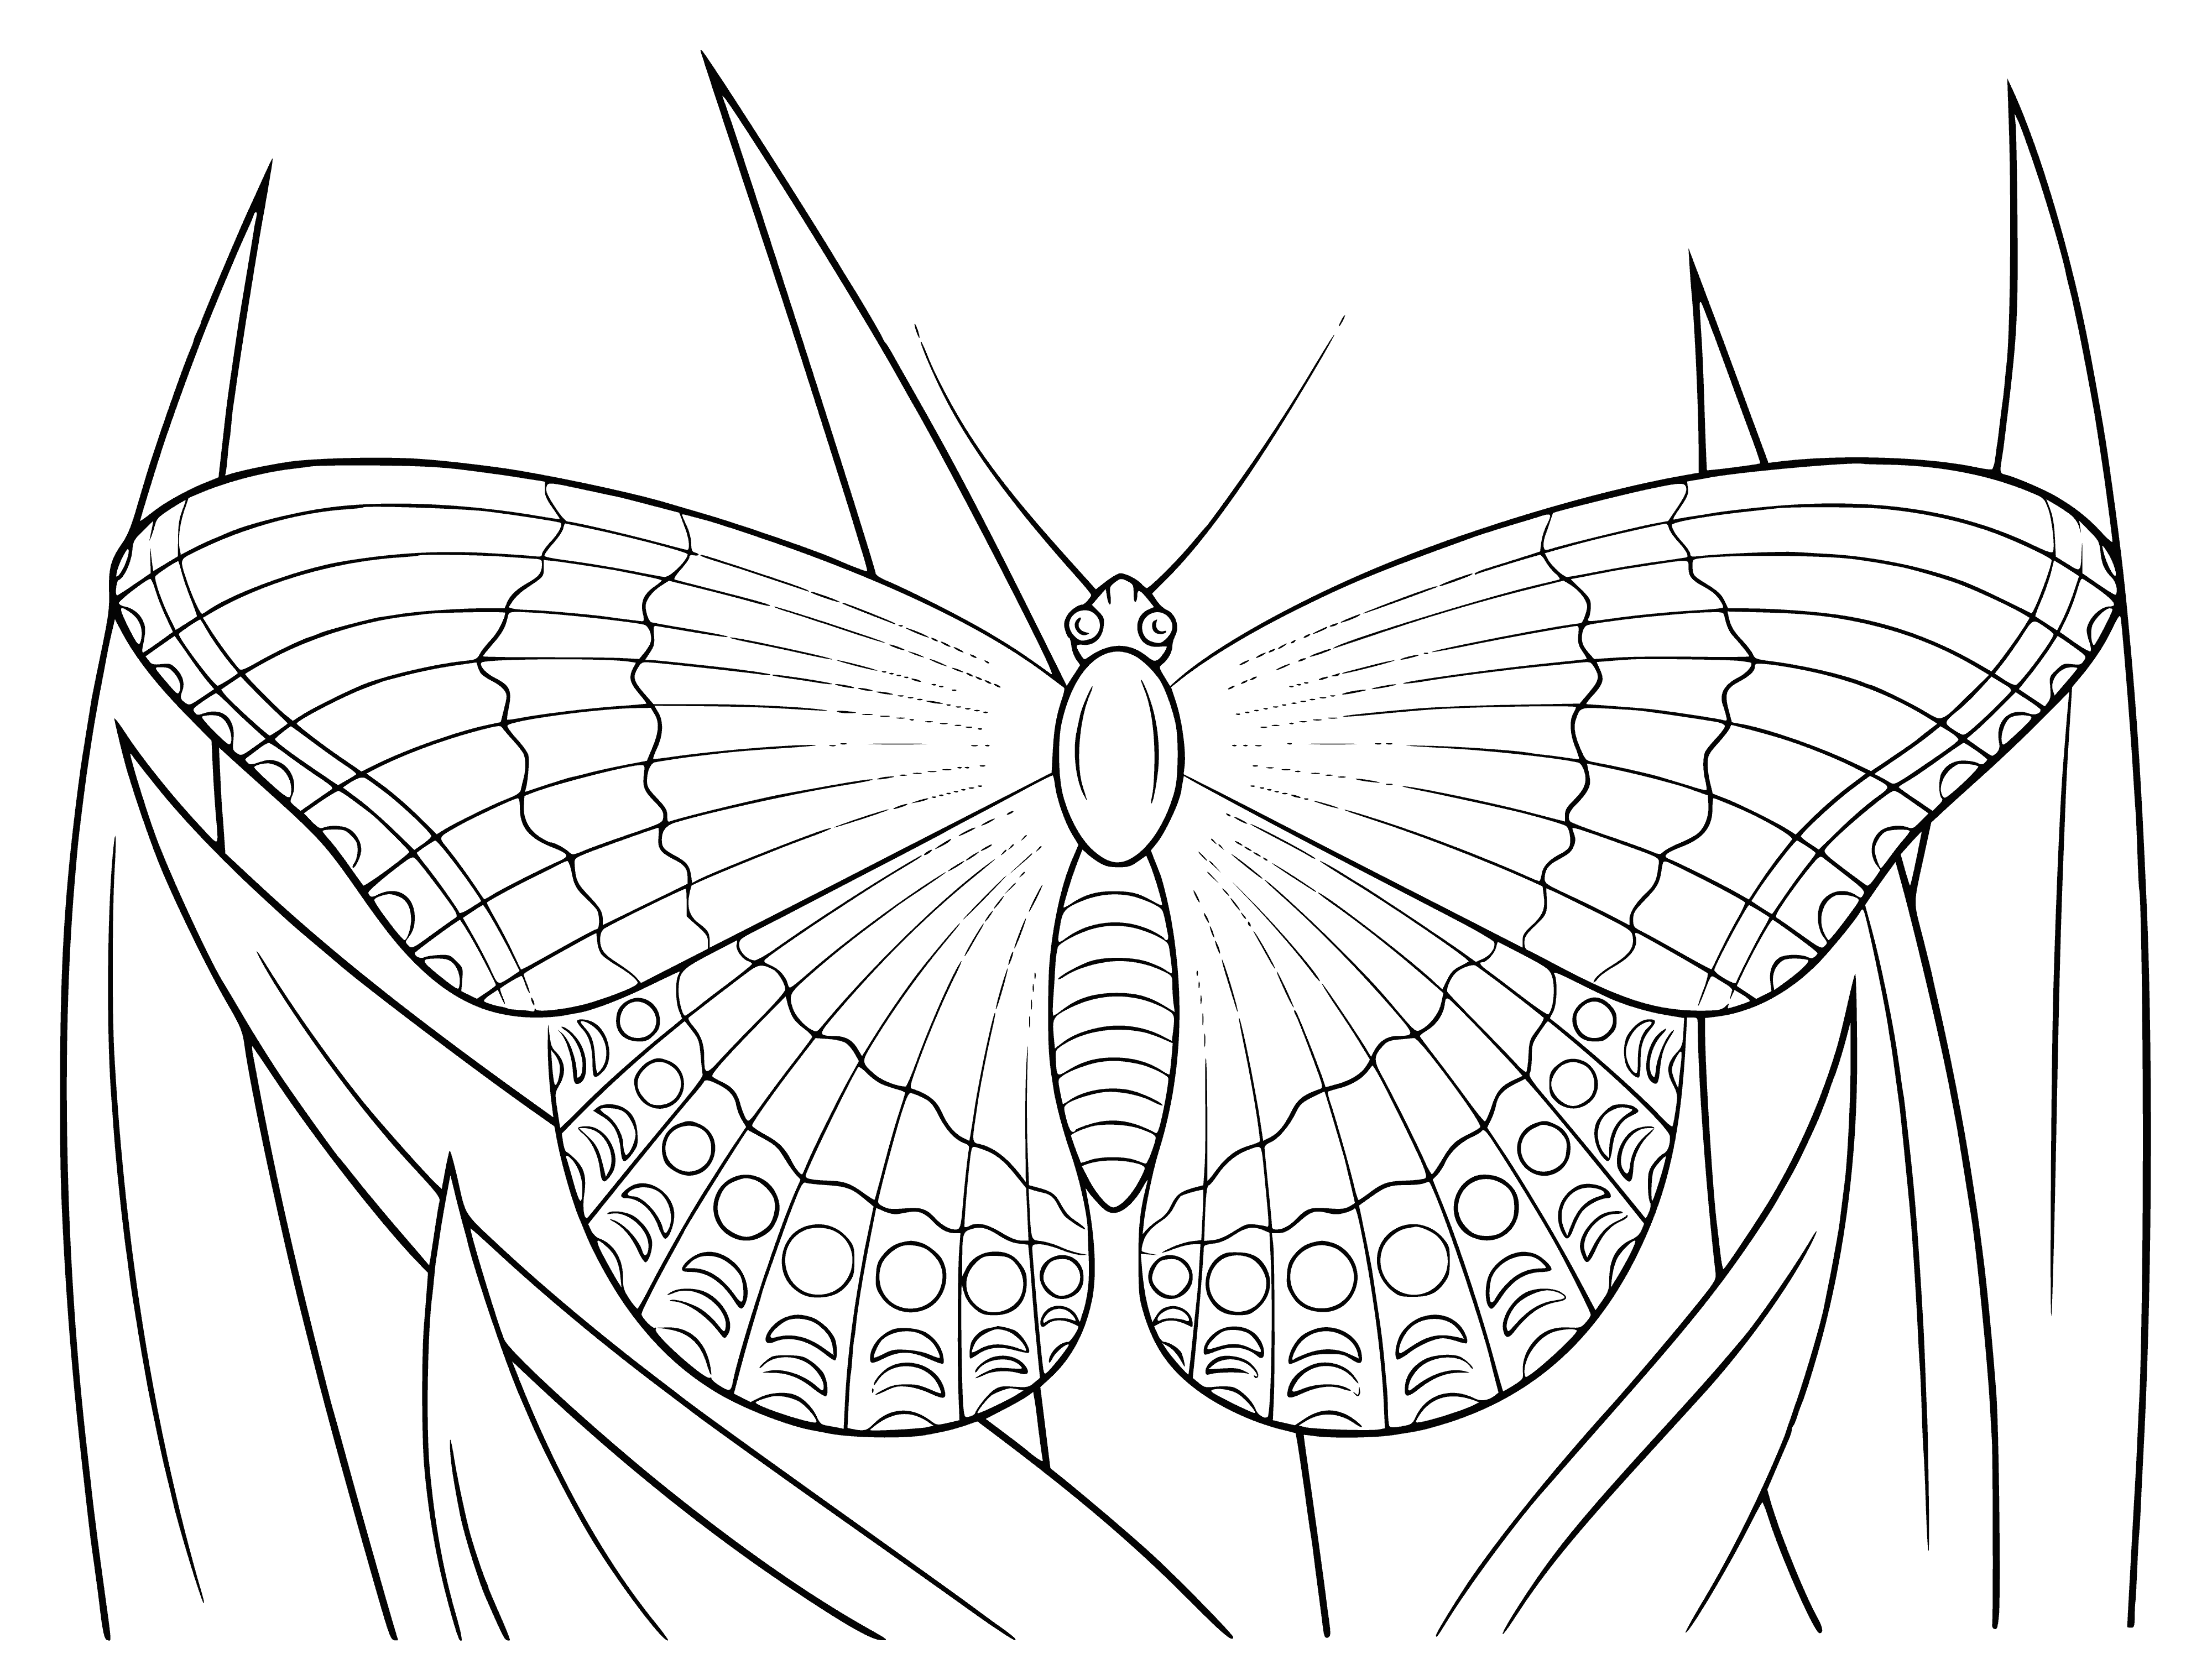 coloring page: Butterfly sits on blade of grass, its wings a light brown with black spots; grass a bright green.